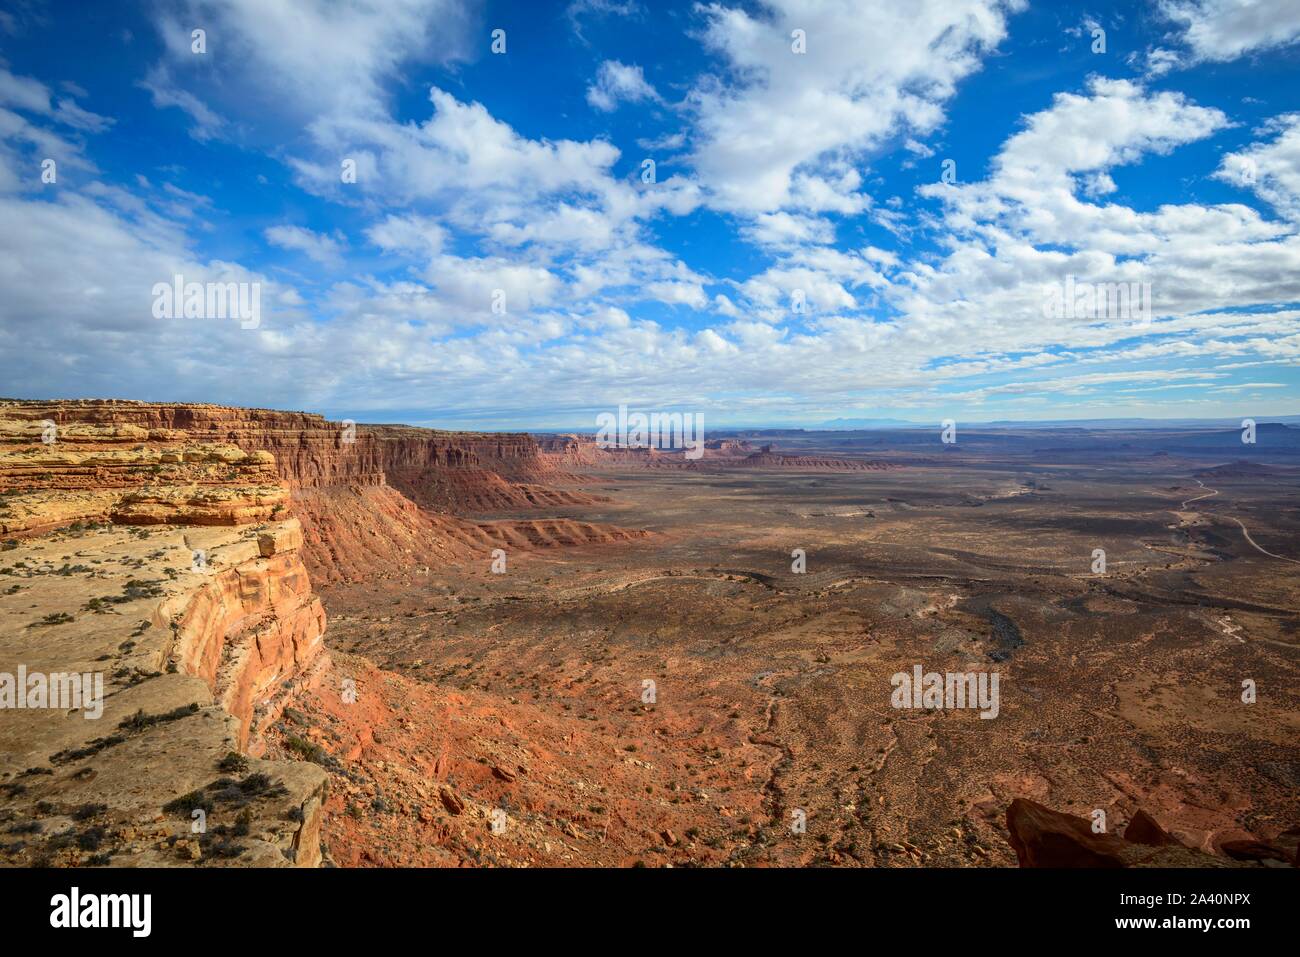 Cedar Mesa at Moki Dugway, view of the Valley of the Gods, Bears Ears National Monument, Utah State Route 261, Utah, USA Stock Photo